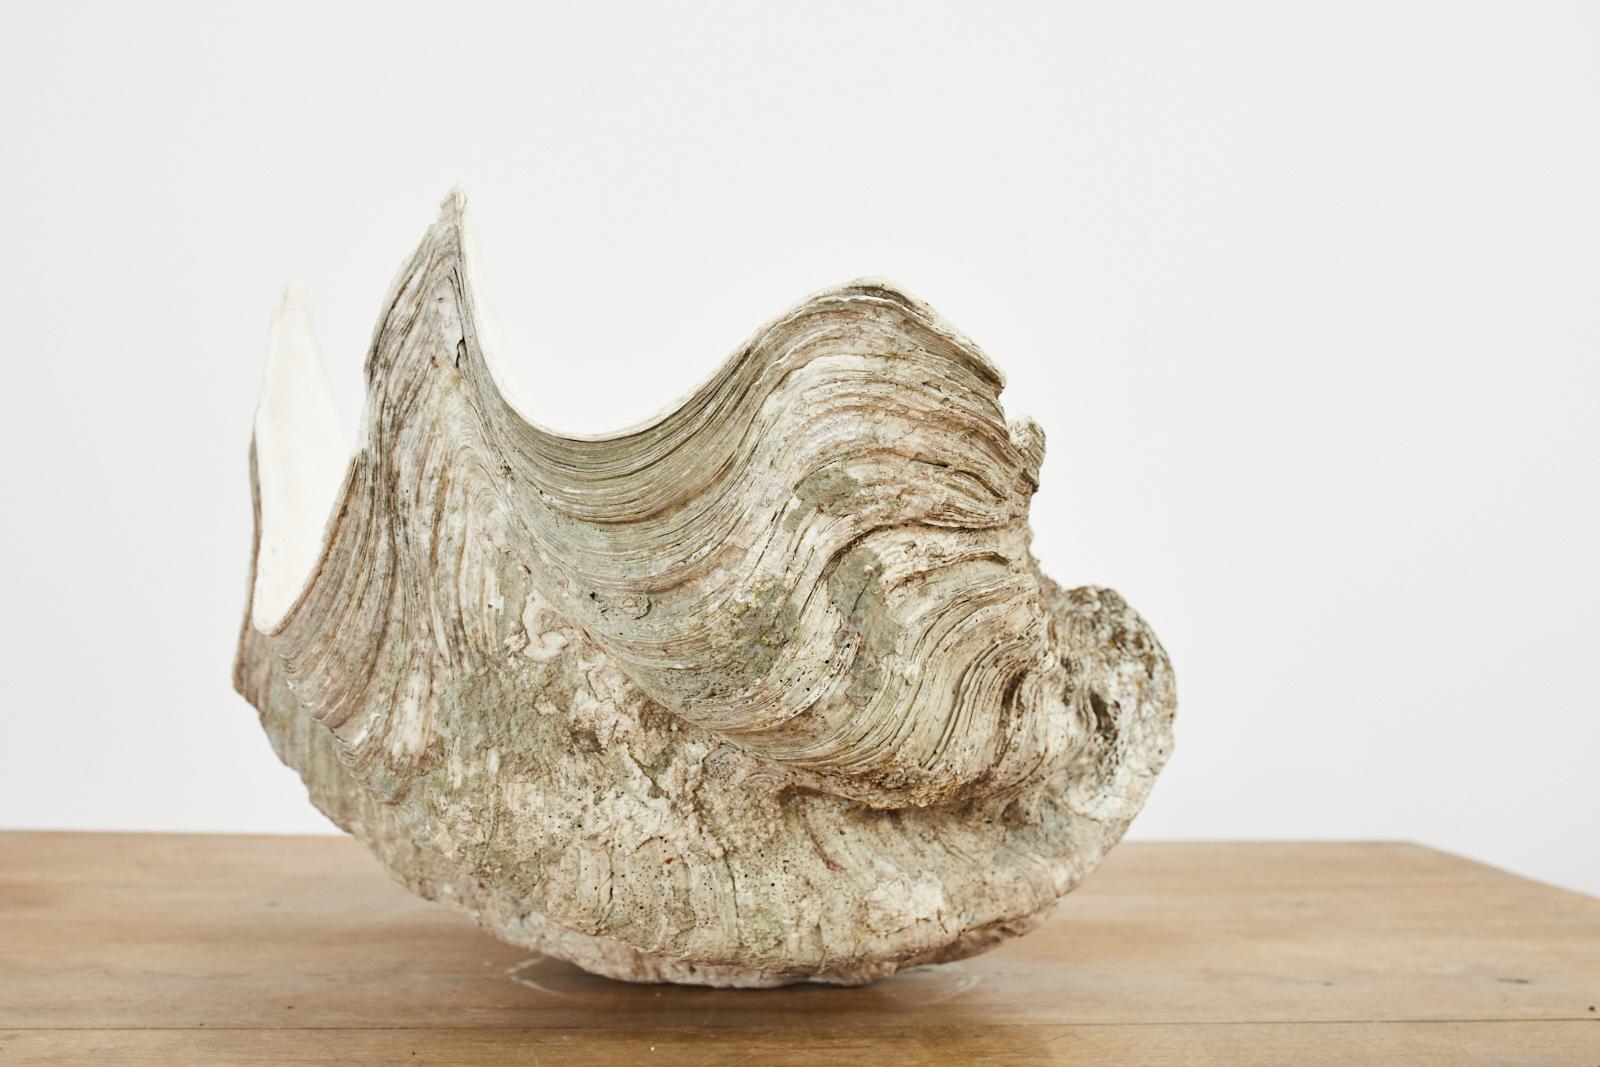 giant clam shell price